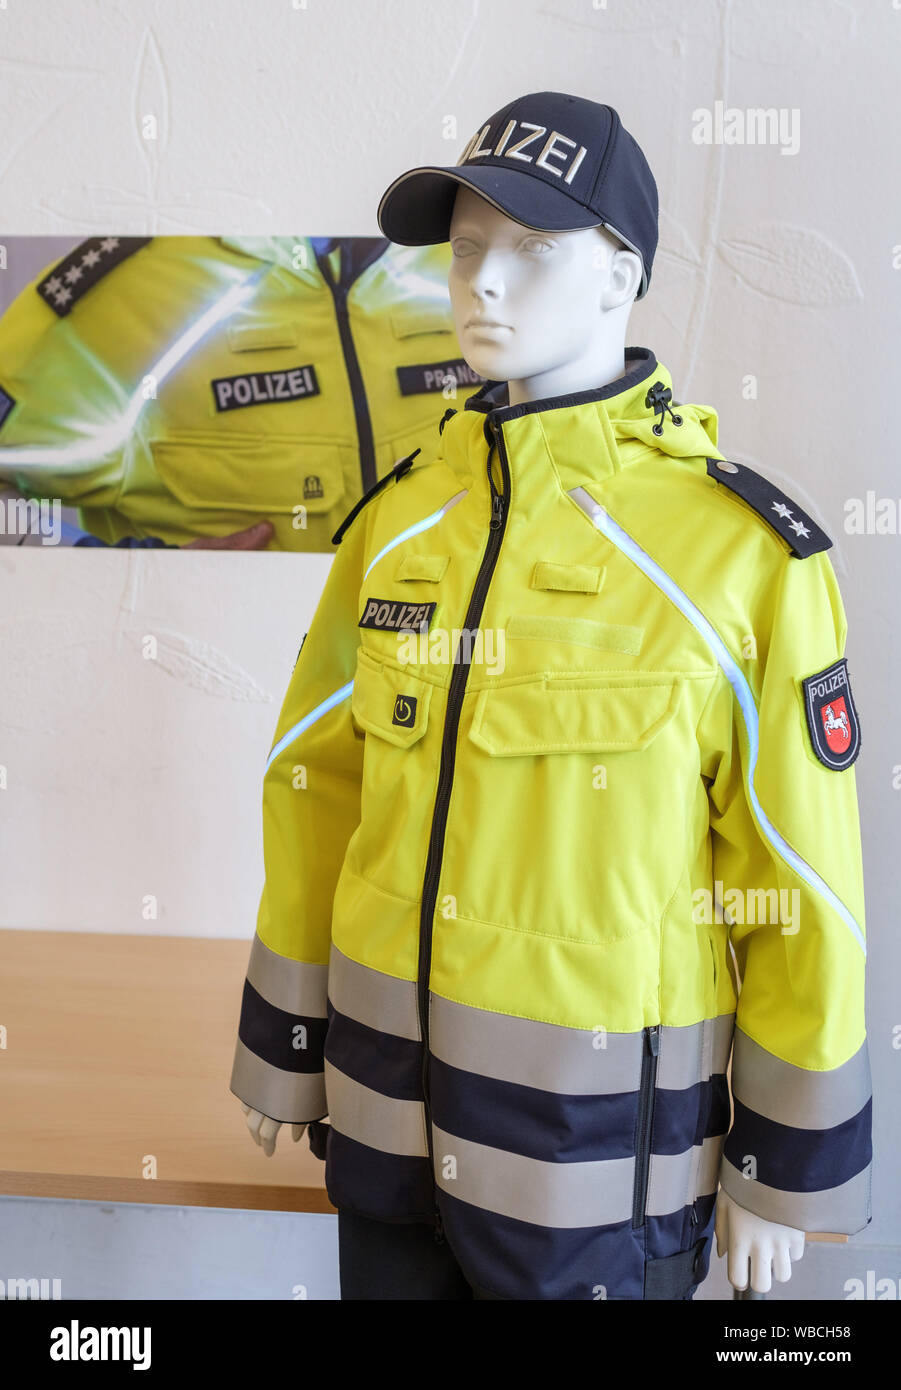 Hanover, Germany. 26th Aug, 2019. The new softshell jacket with active LED  lighting is presented on a mannequin during a press conference to modernize  the equipment of the Lower Saxony police. Credit: